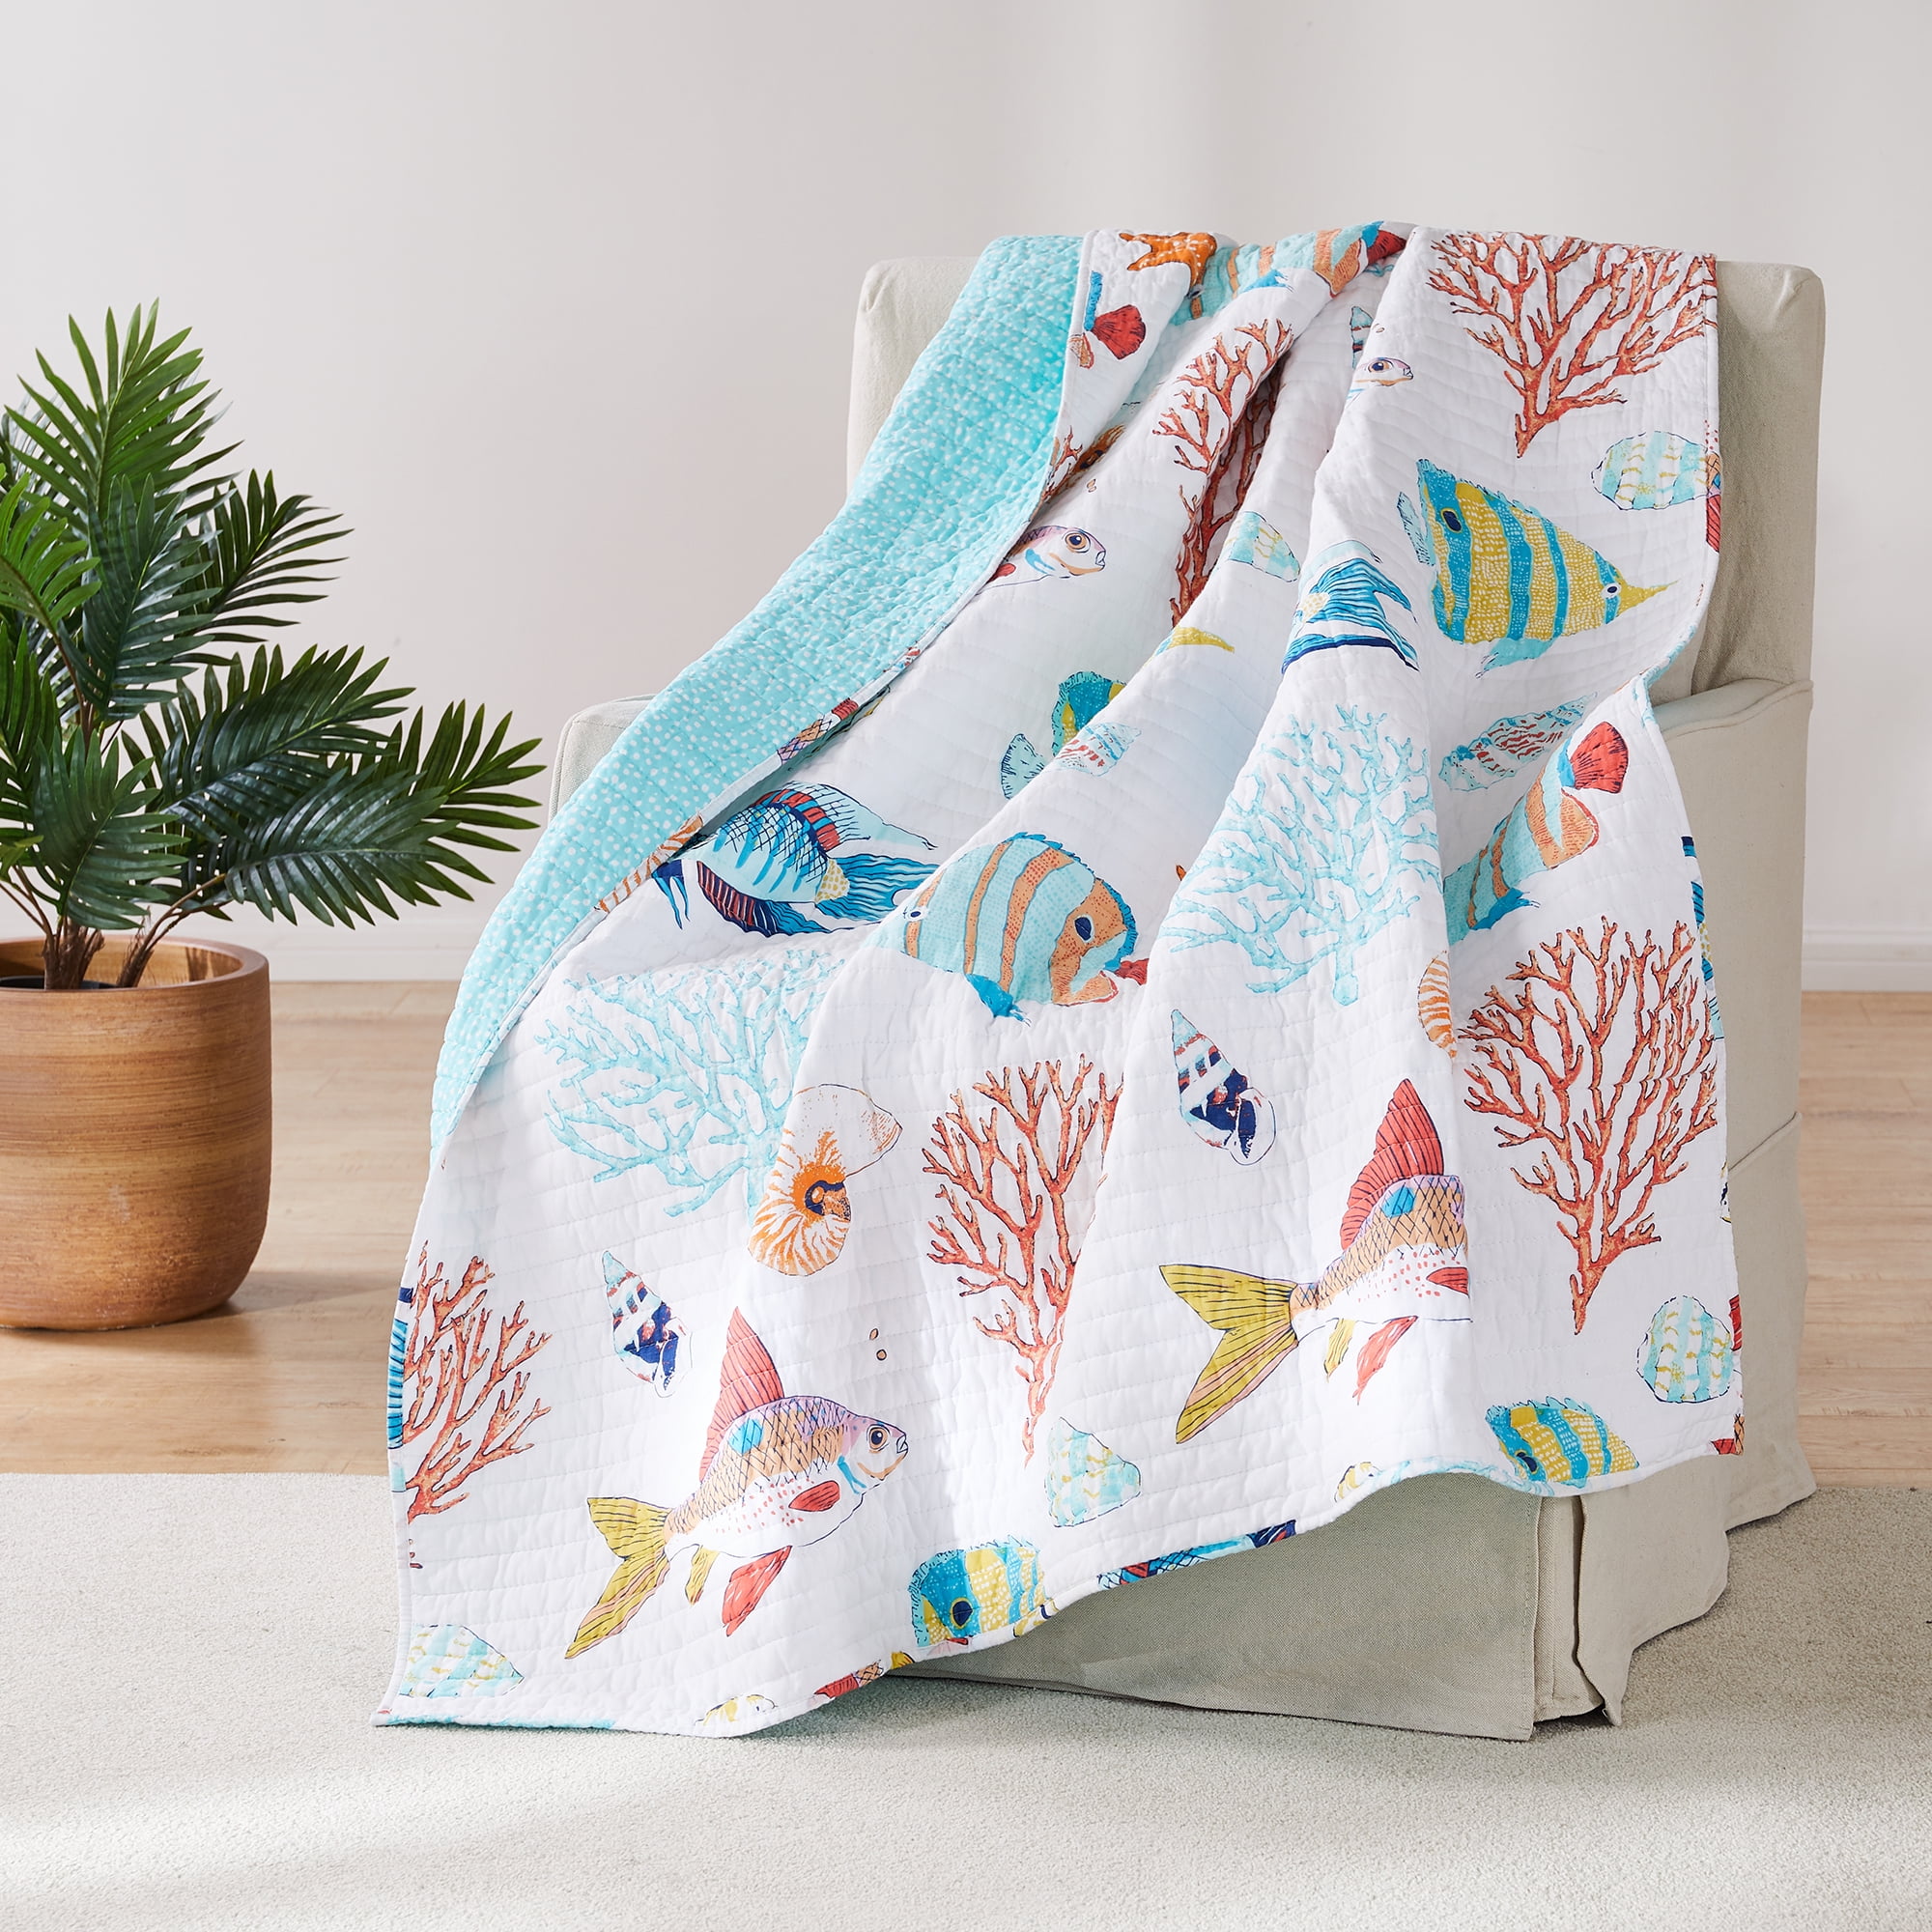 Levtex Home - Barrier Reef - Quilted Throw - 50x60